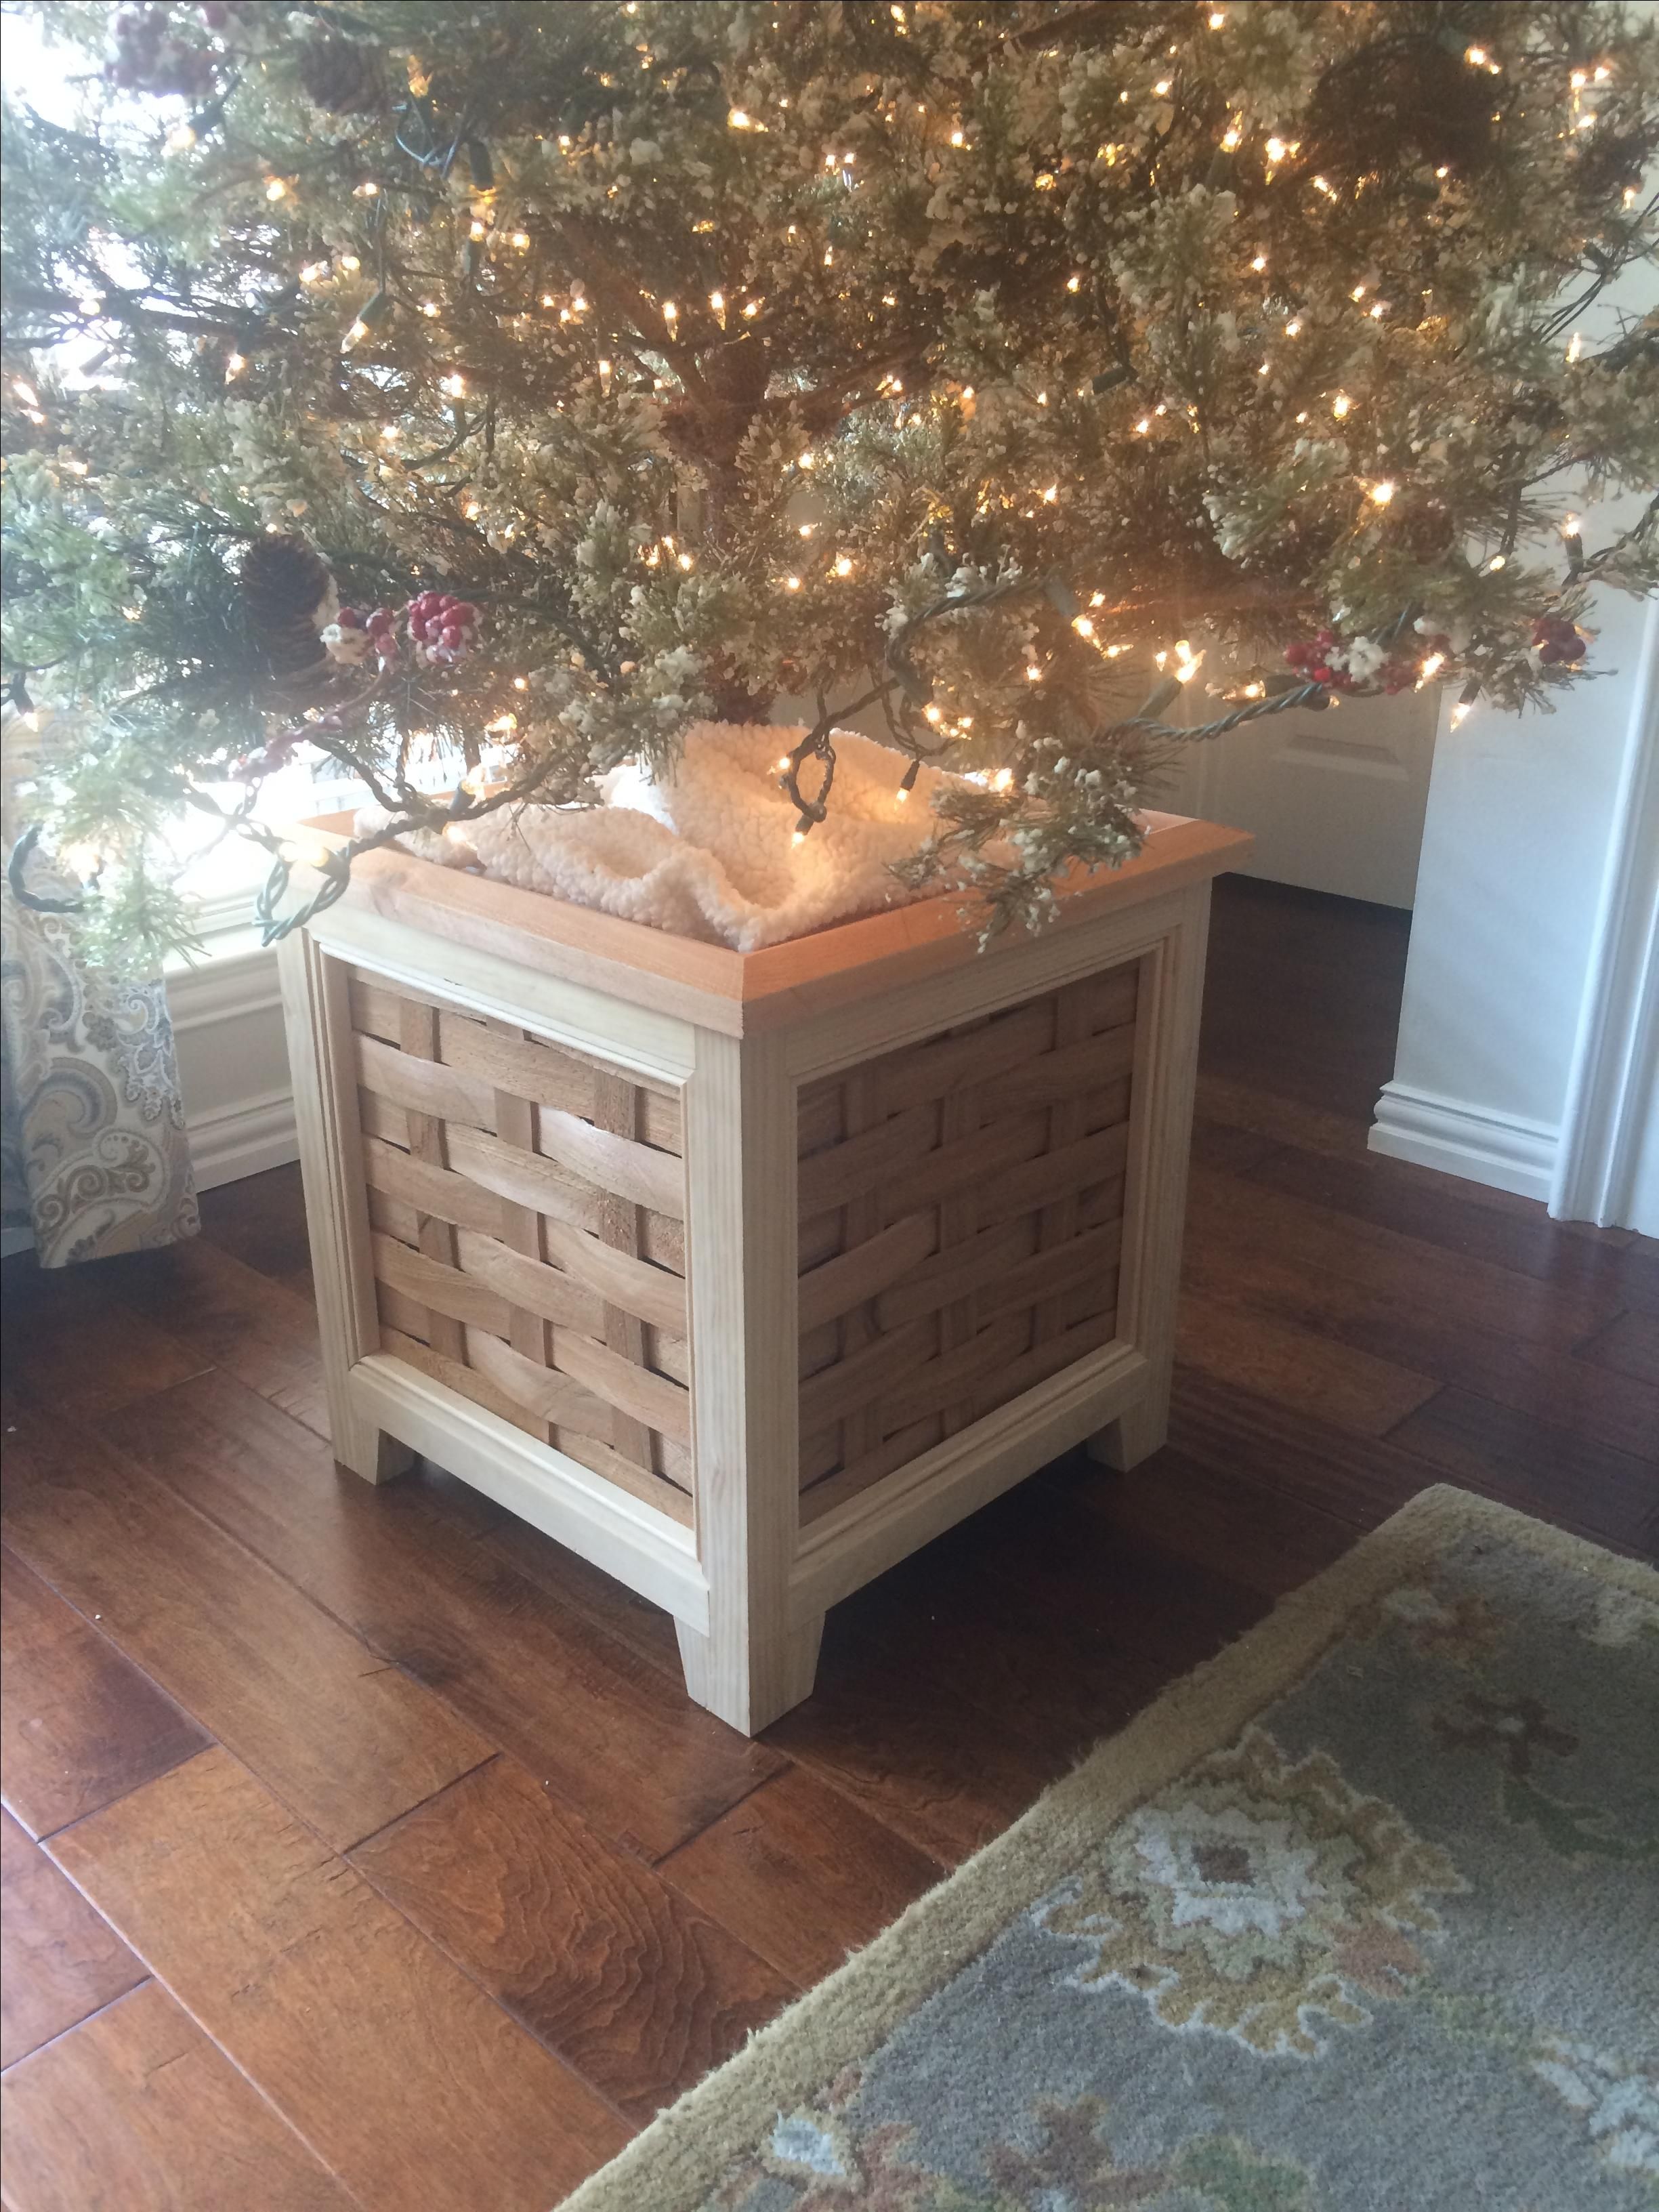 Buy a Custom Christmas Tree Stand/Storage Box/Indoor Planter, made to order from Ernie & Co ...